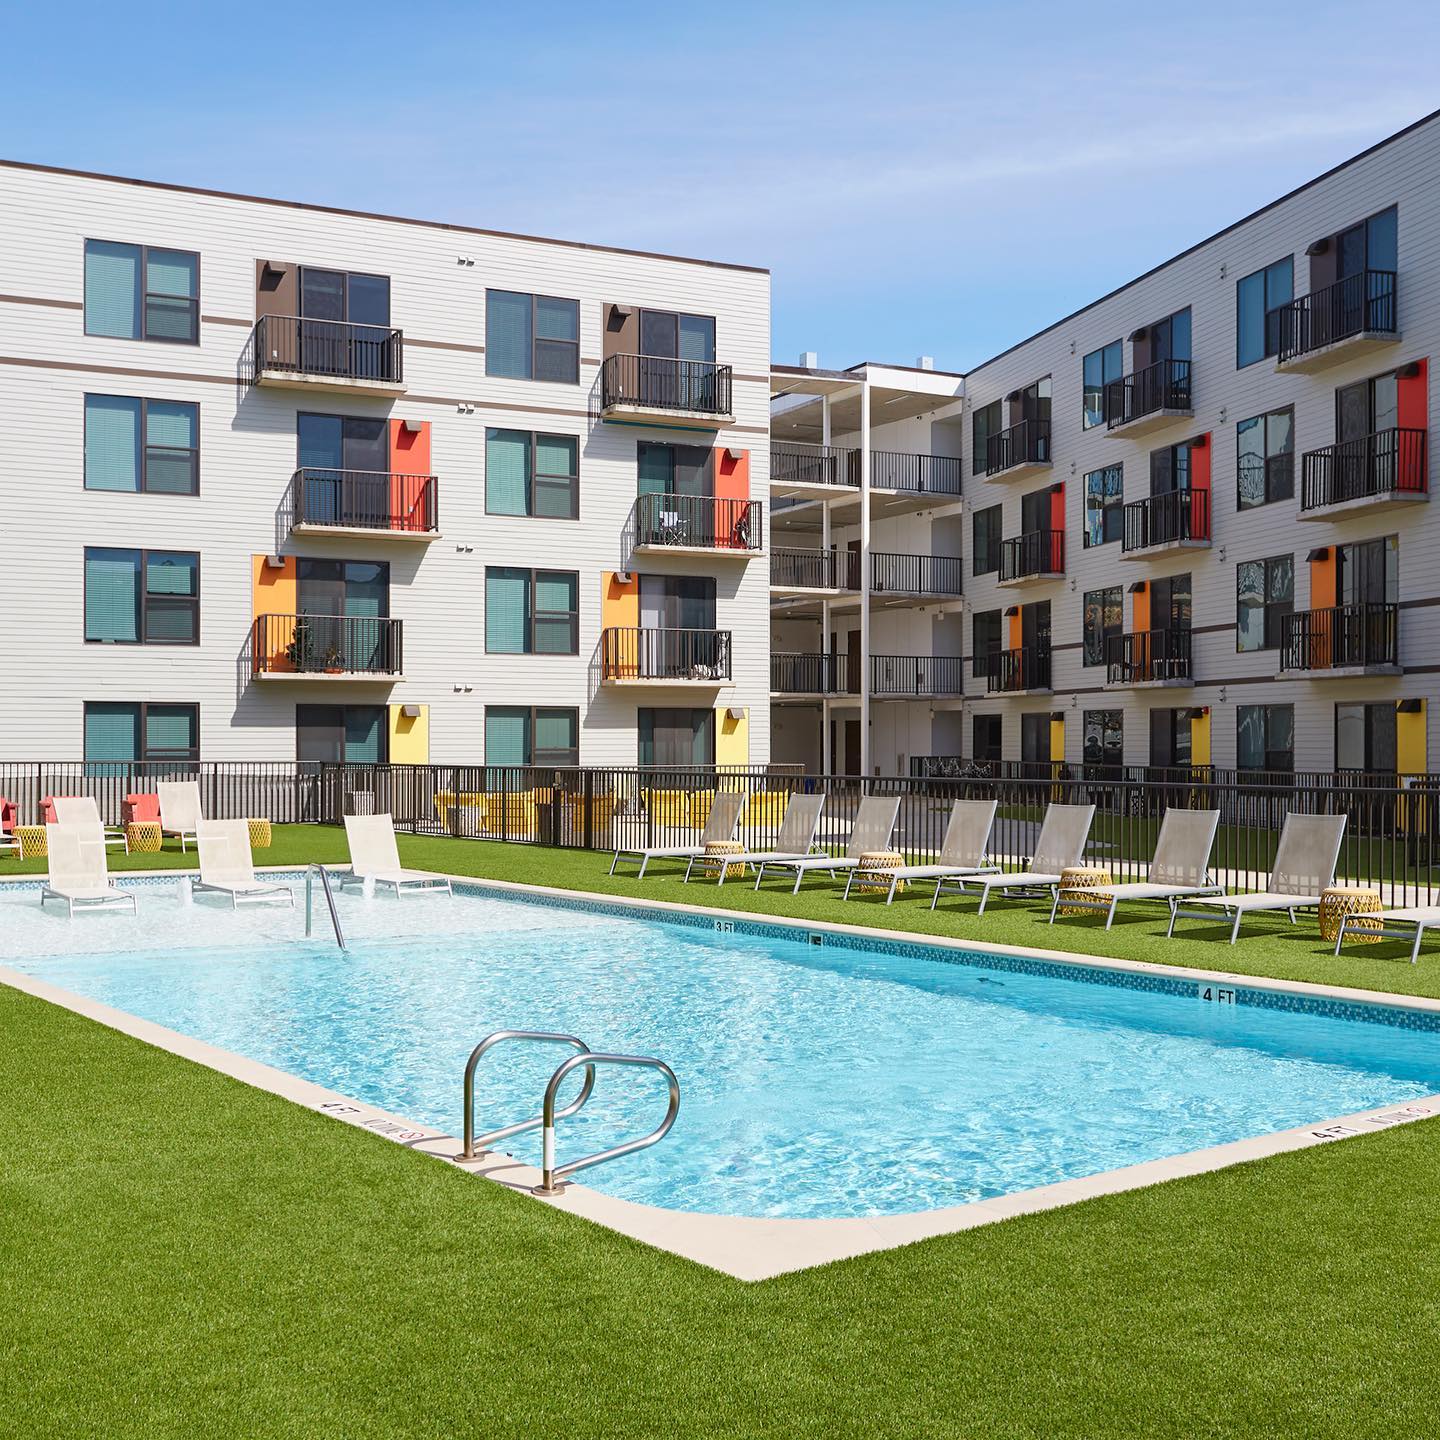 Exterior shot of apartment units in the background featuring a pool in the middle. @midmainlofts